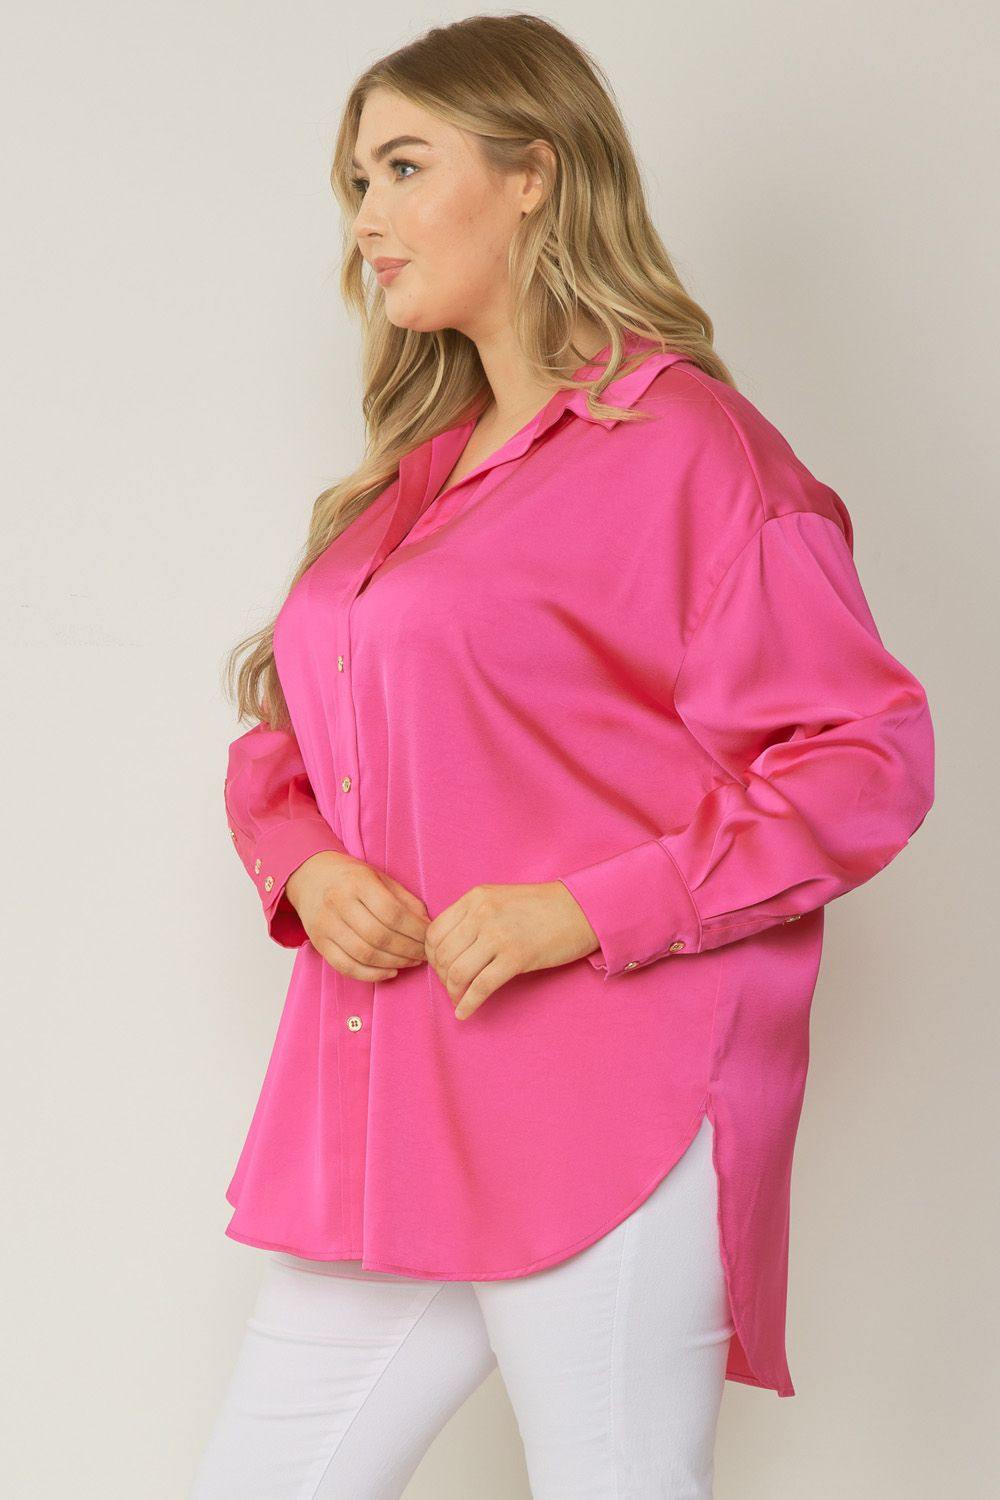 Long-sleeved collared button down satin  blouse Plus boutique hot pink